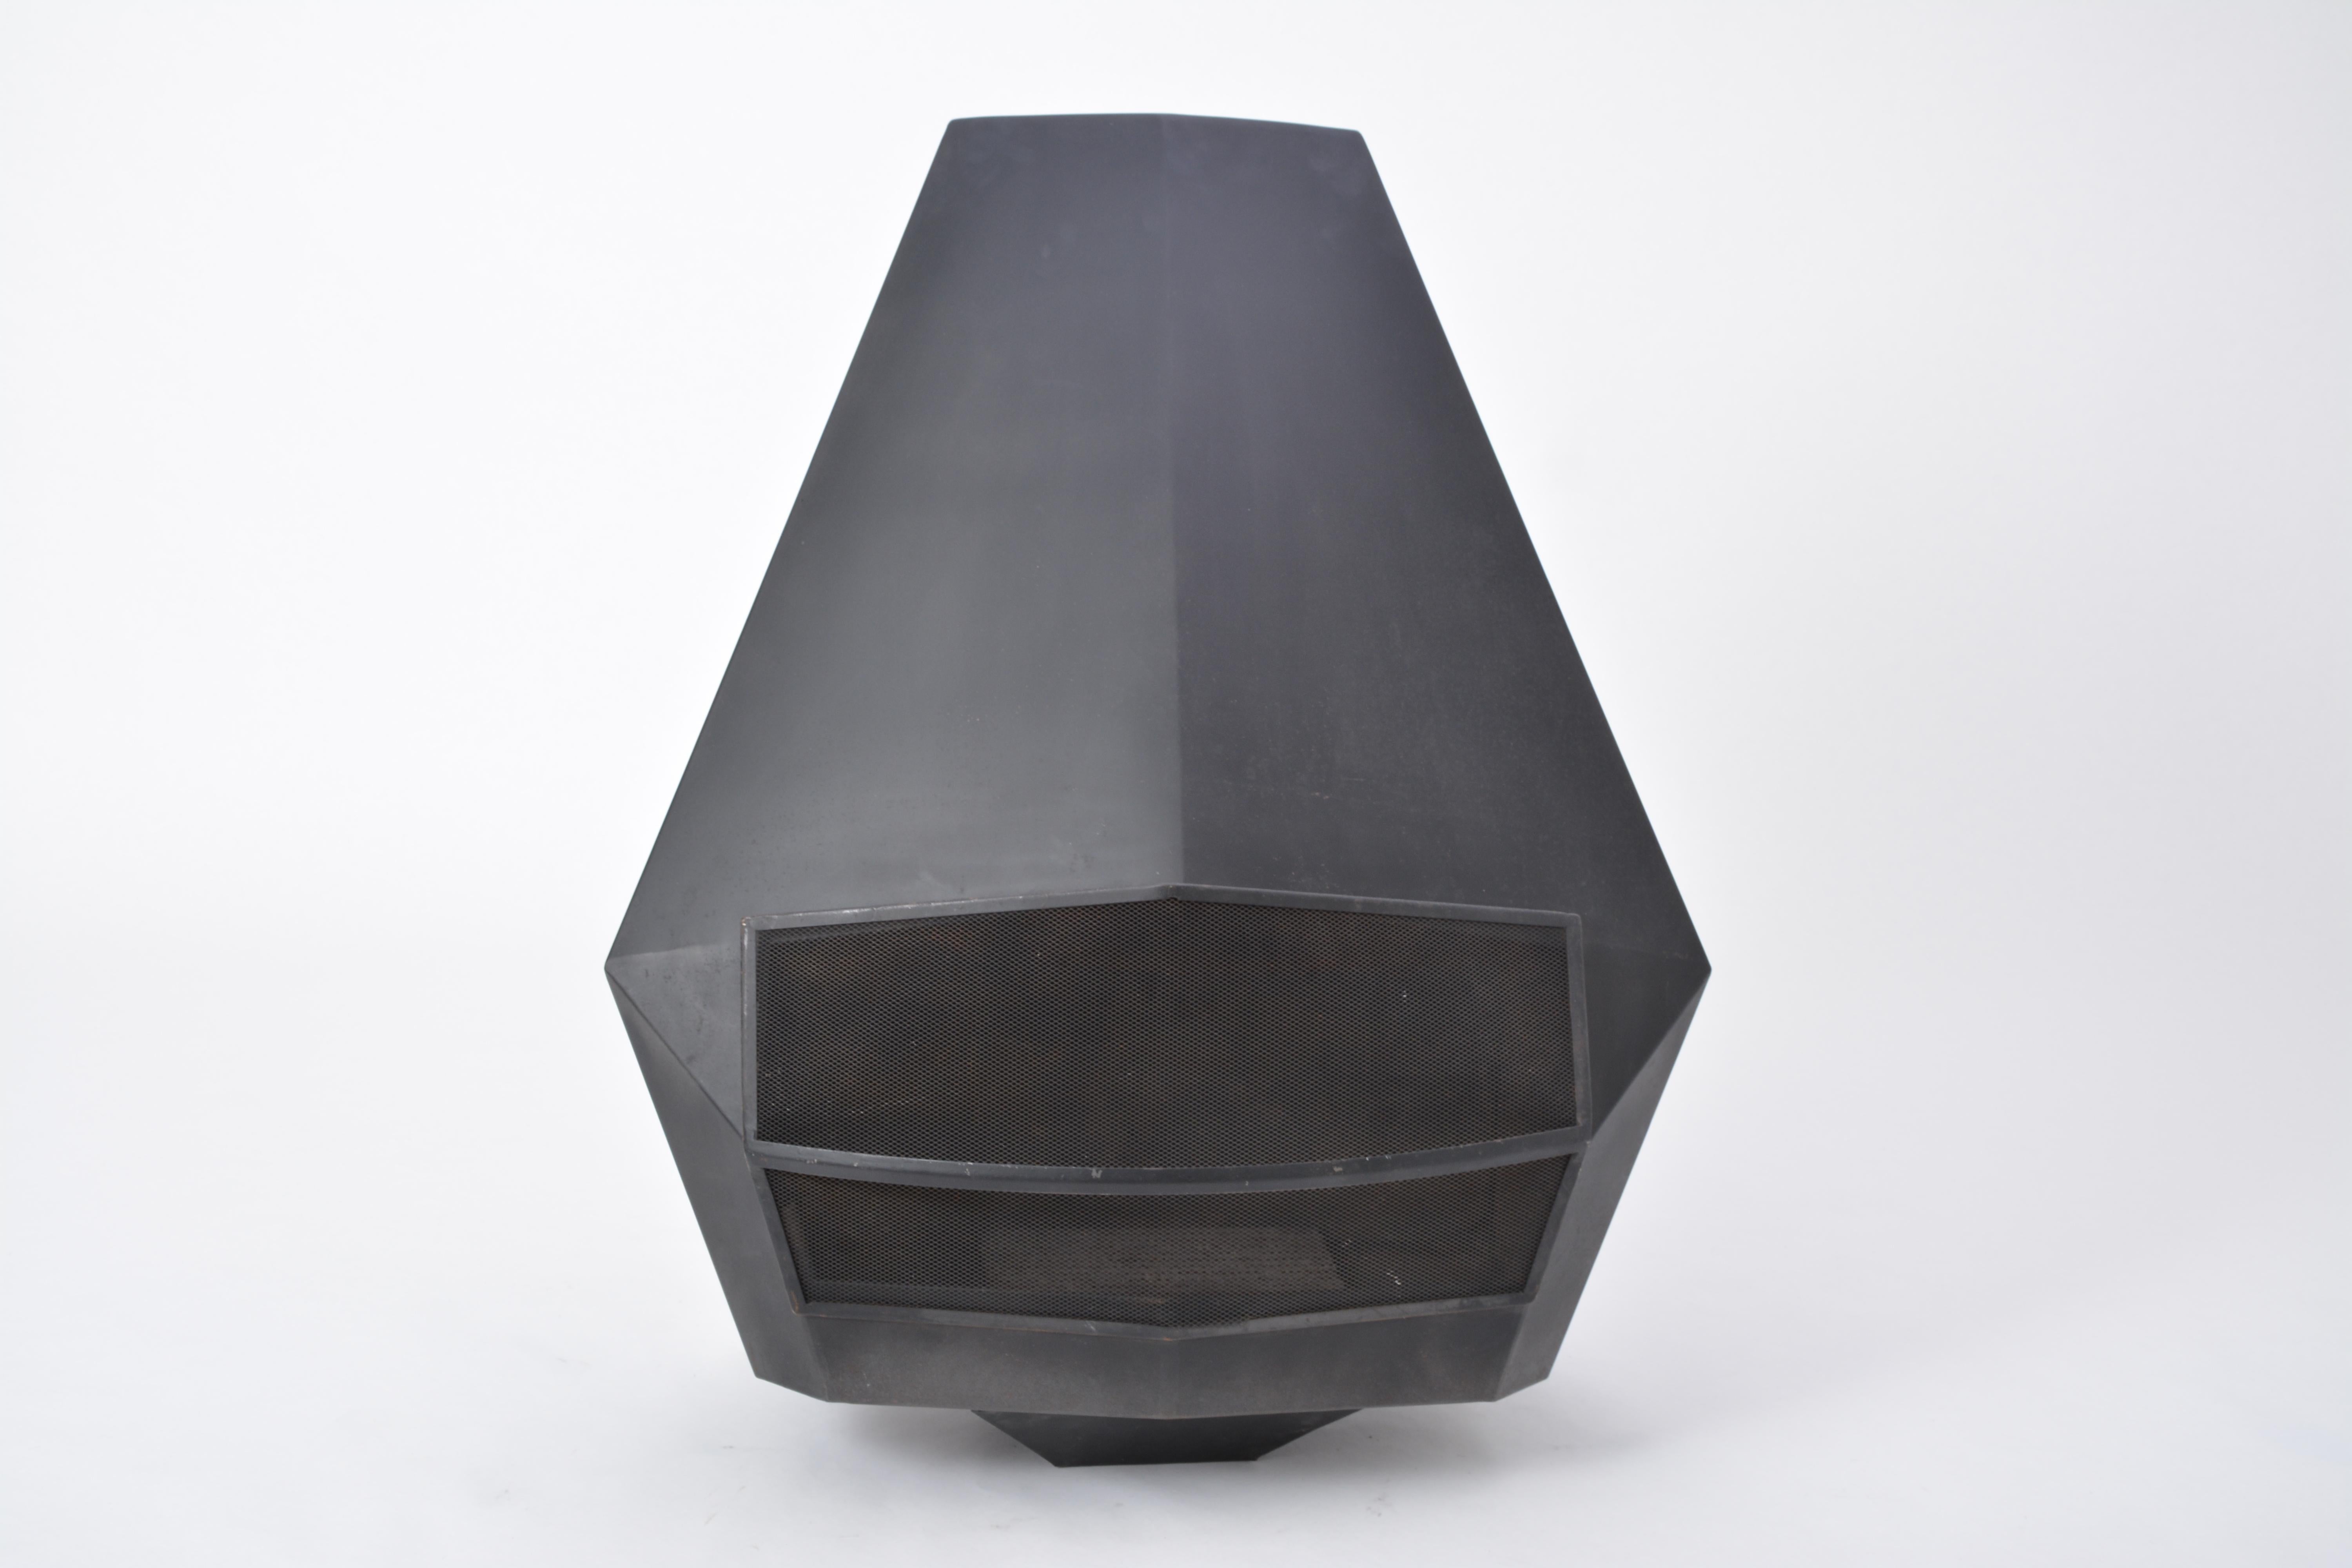 Model 5005 Mid-Century Modern Steel fireplace from Don-Bar Design

A Model 5005 wall-mounted robust fireplace in black coated steel produced by Belgian company Don-Bar Design in the 1970s.
Comes with ash pan, metal suspension handles, grill, fire